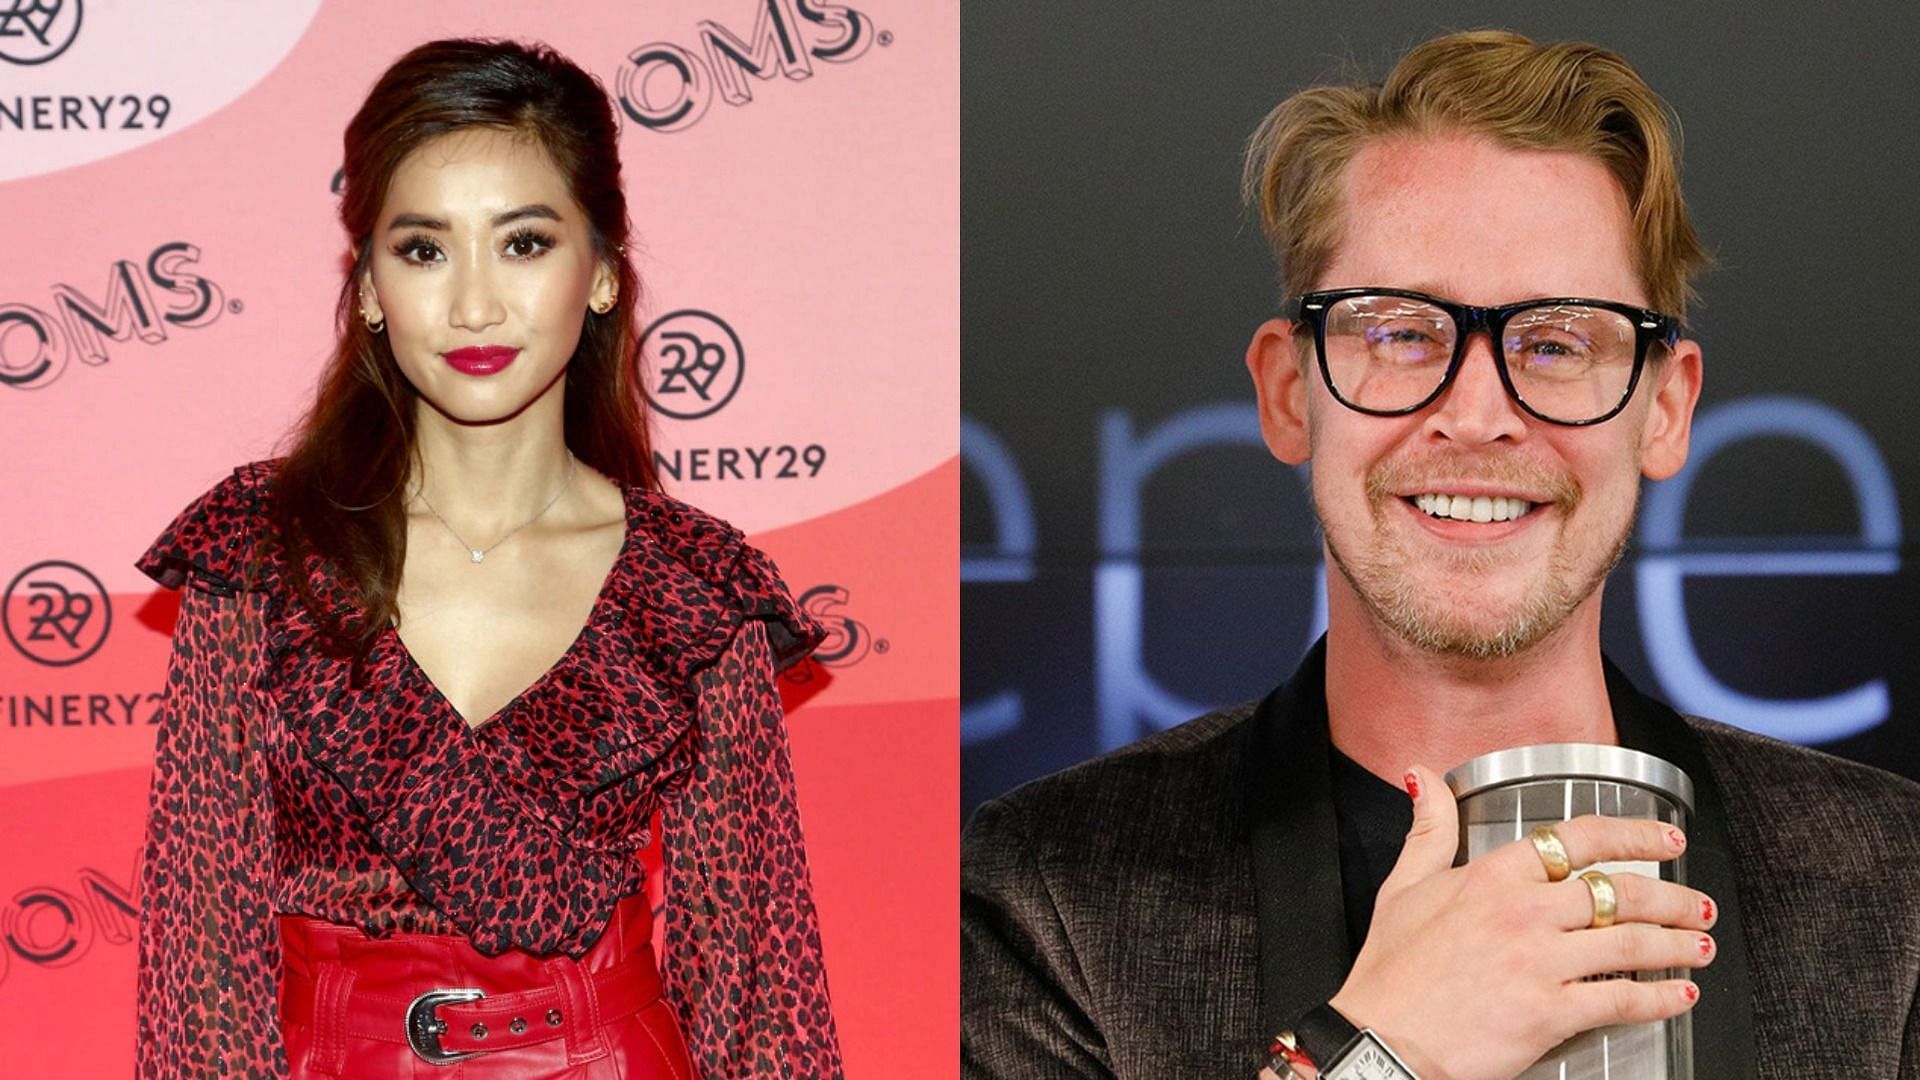 Brenda Song and Macaulay Culkin started dating in 2017 and welcomed their first child in 2021 (Image via Getty Images/ Tommaso Boddi/ Kimberly White)